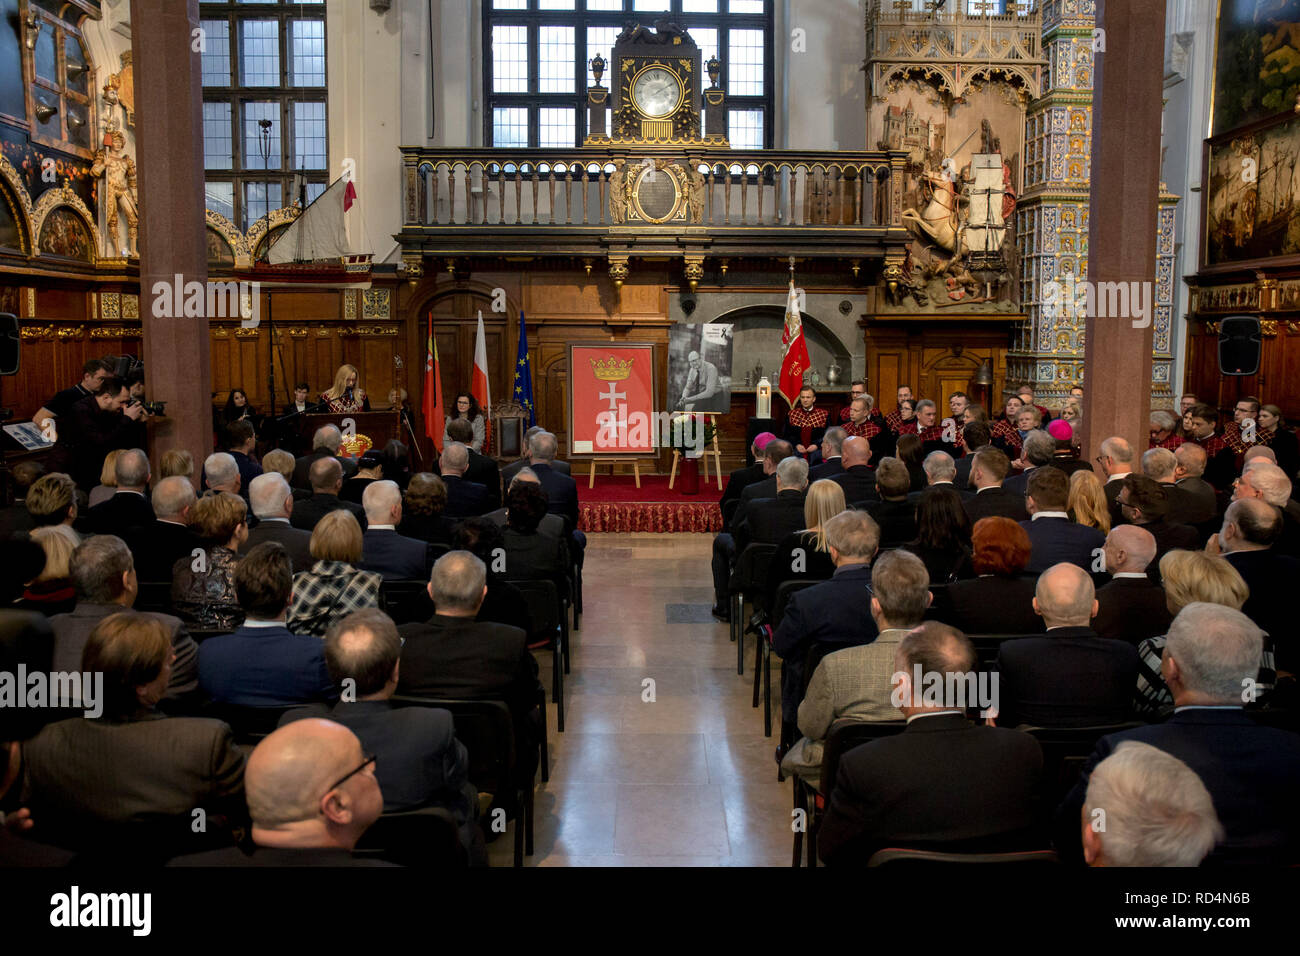 Solemn session of the city council in the memory of Pawel Adamowicz, the mayor of Gdansk stabbed on Sunday is held on January 17, 2019 in Gdansk, Poland Stock Photo